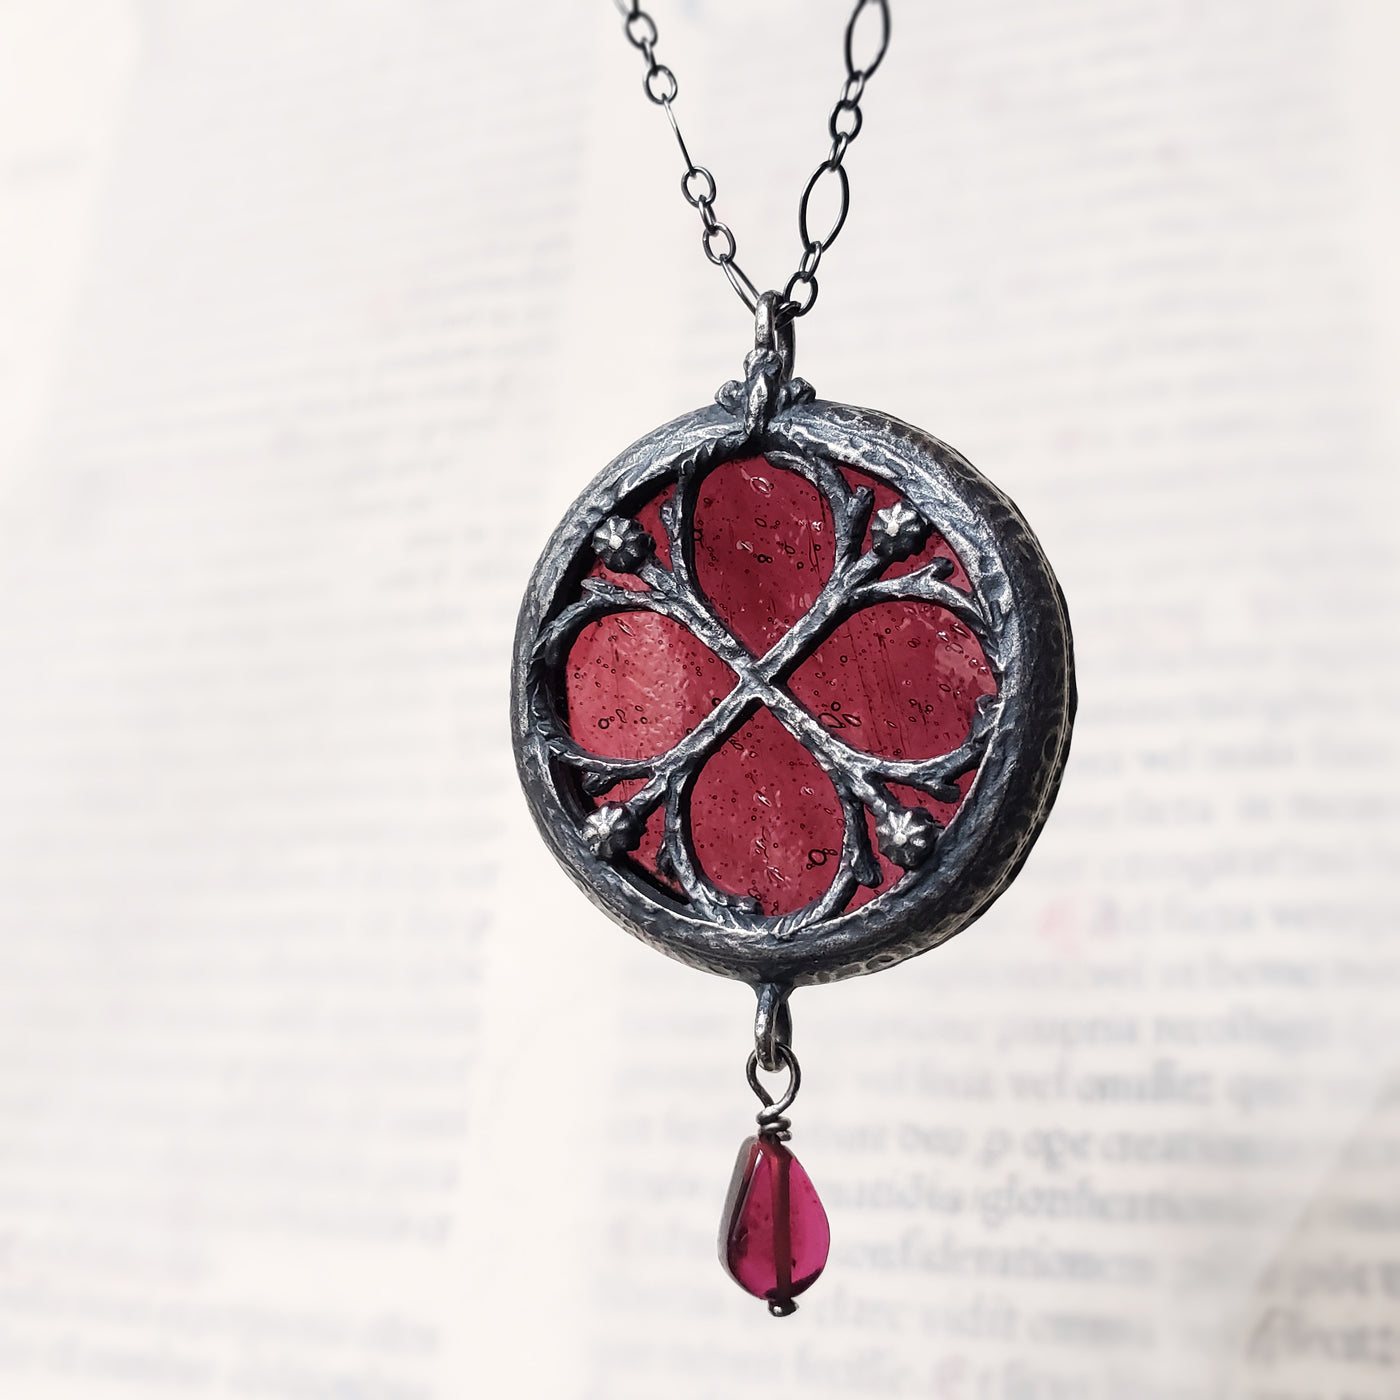 persephone - floriated clover miracle window amulet